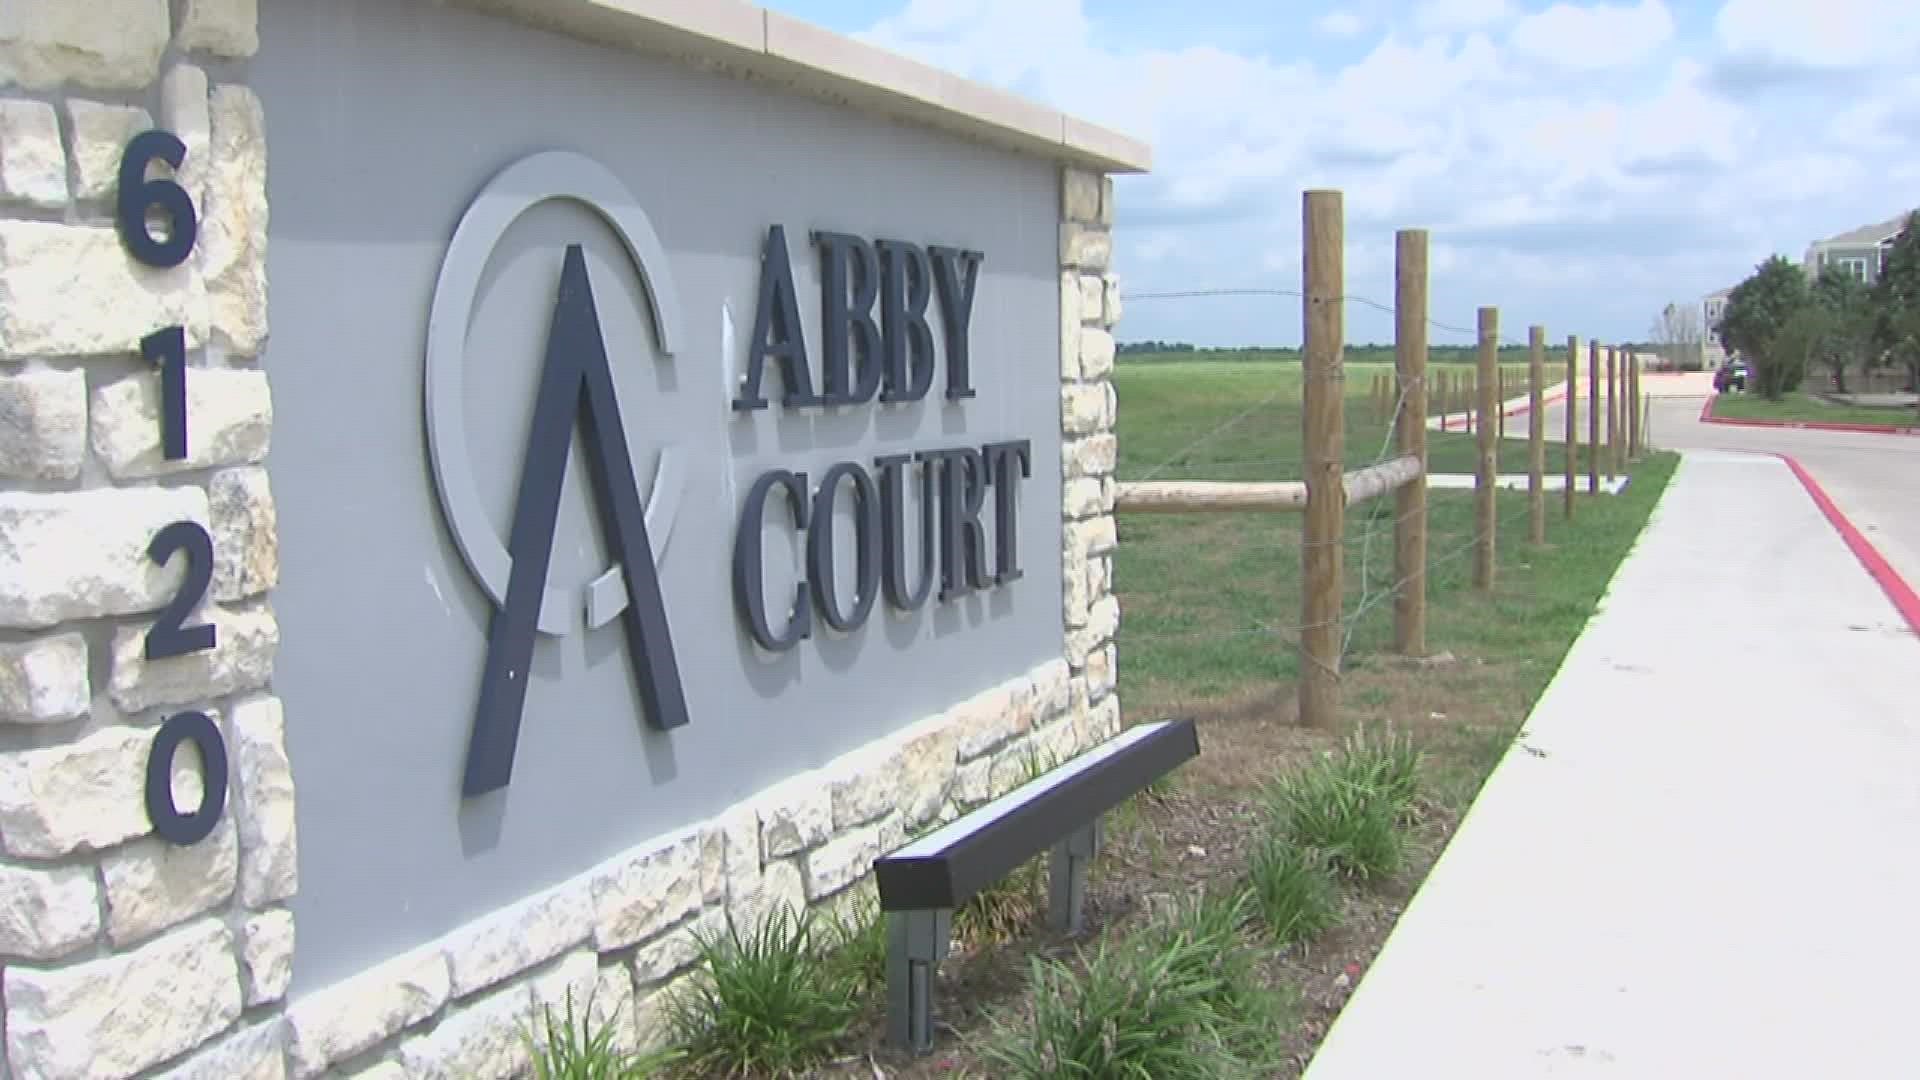 The TGLO was awarded $22 million to build Abby Court, a 210-unit rental complex in Beaumont.